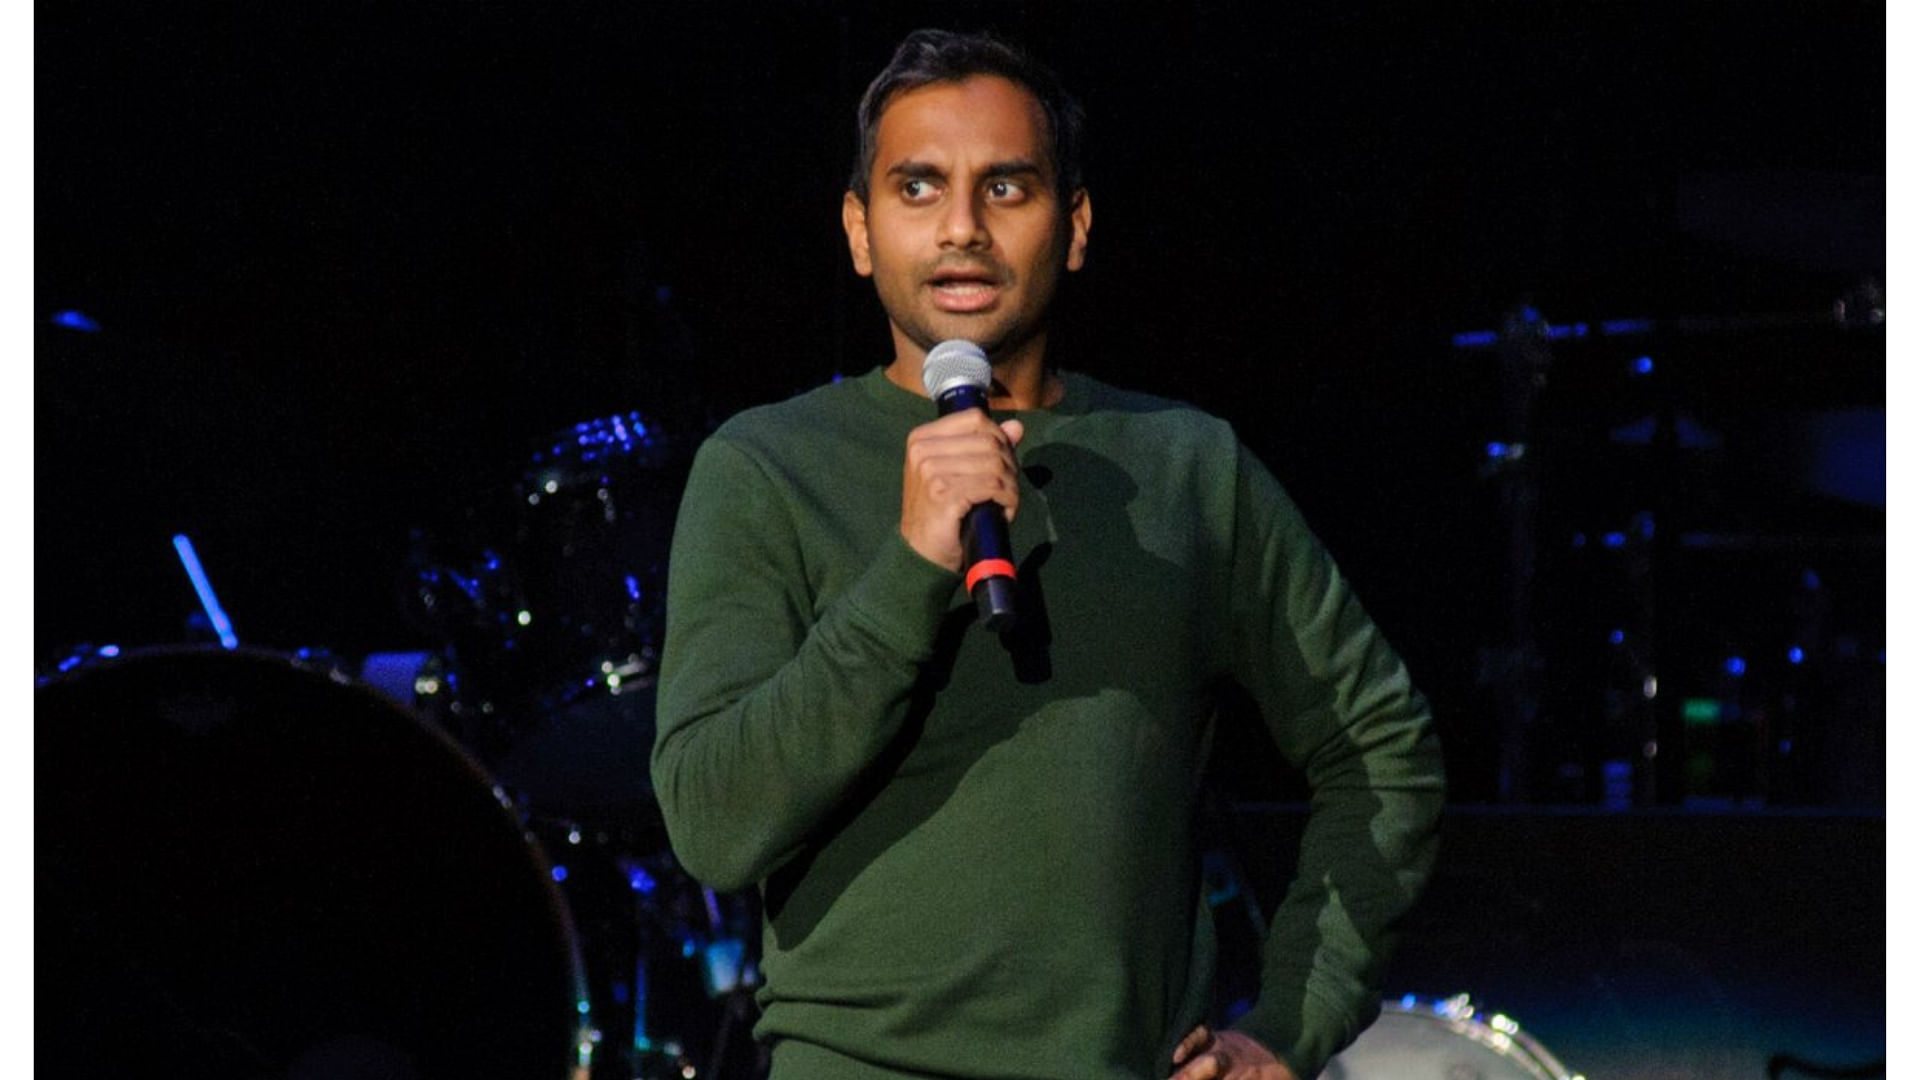 Comedian Aziz Ansari’s new stand-up special <i>Aziz Ansari Right Now</i> releases on Netflix in July.